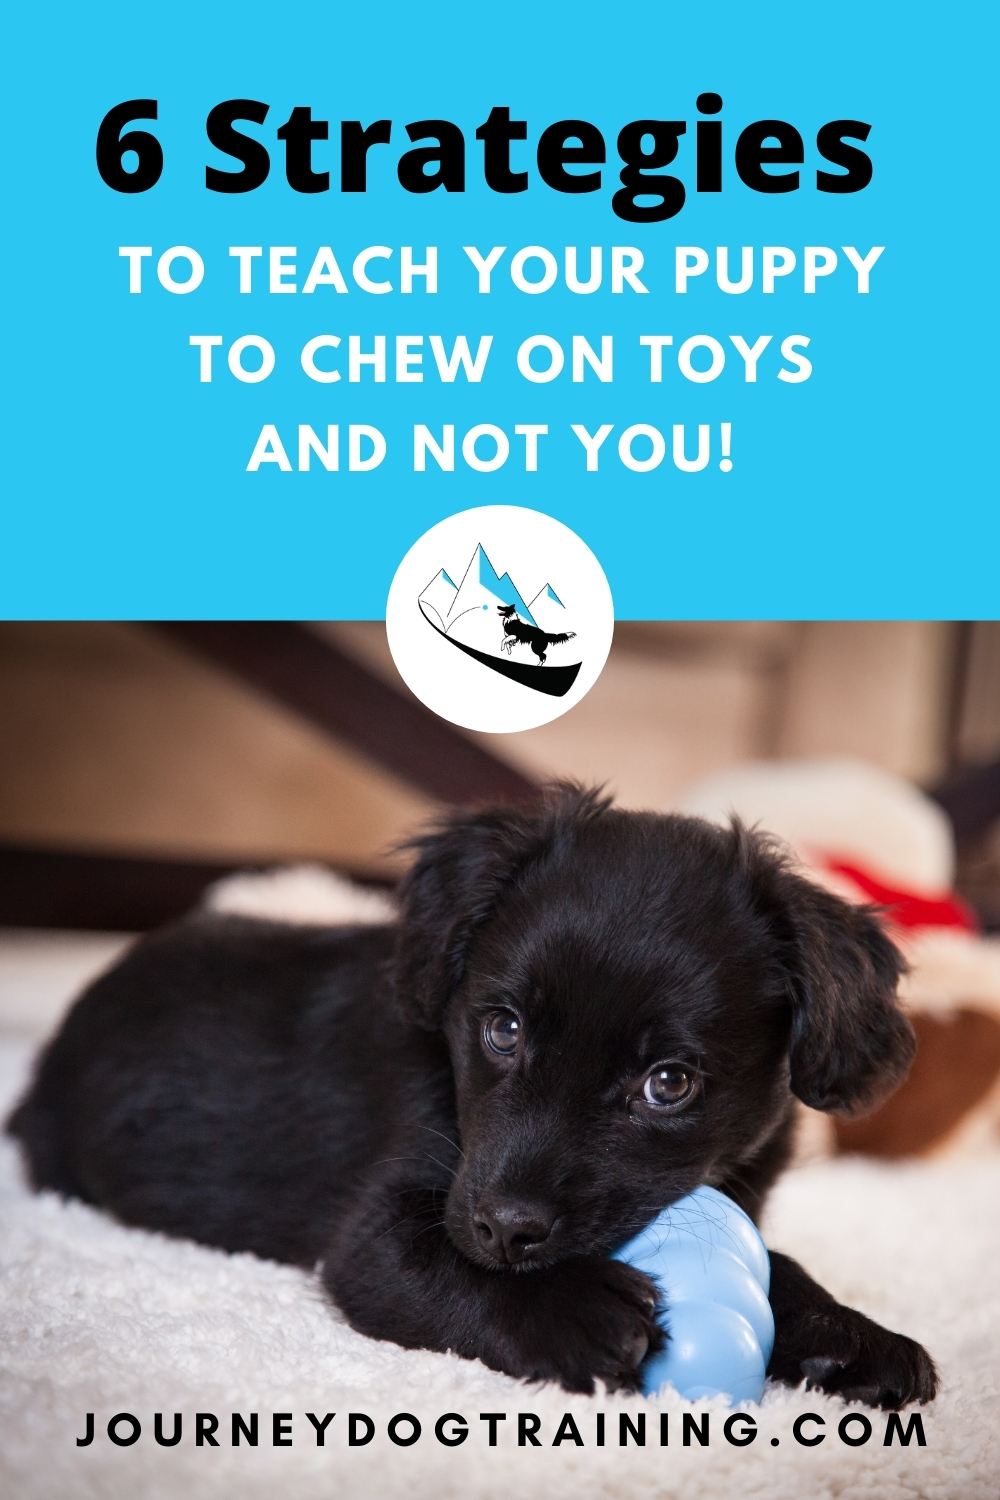 My puppy thinks i'm a chew toy. What should I do? How do I get my puppy to chew on his toys and not me? | journeydogtraining.com